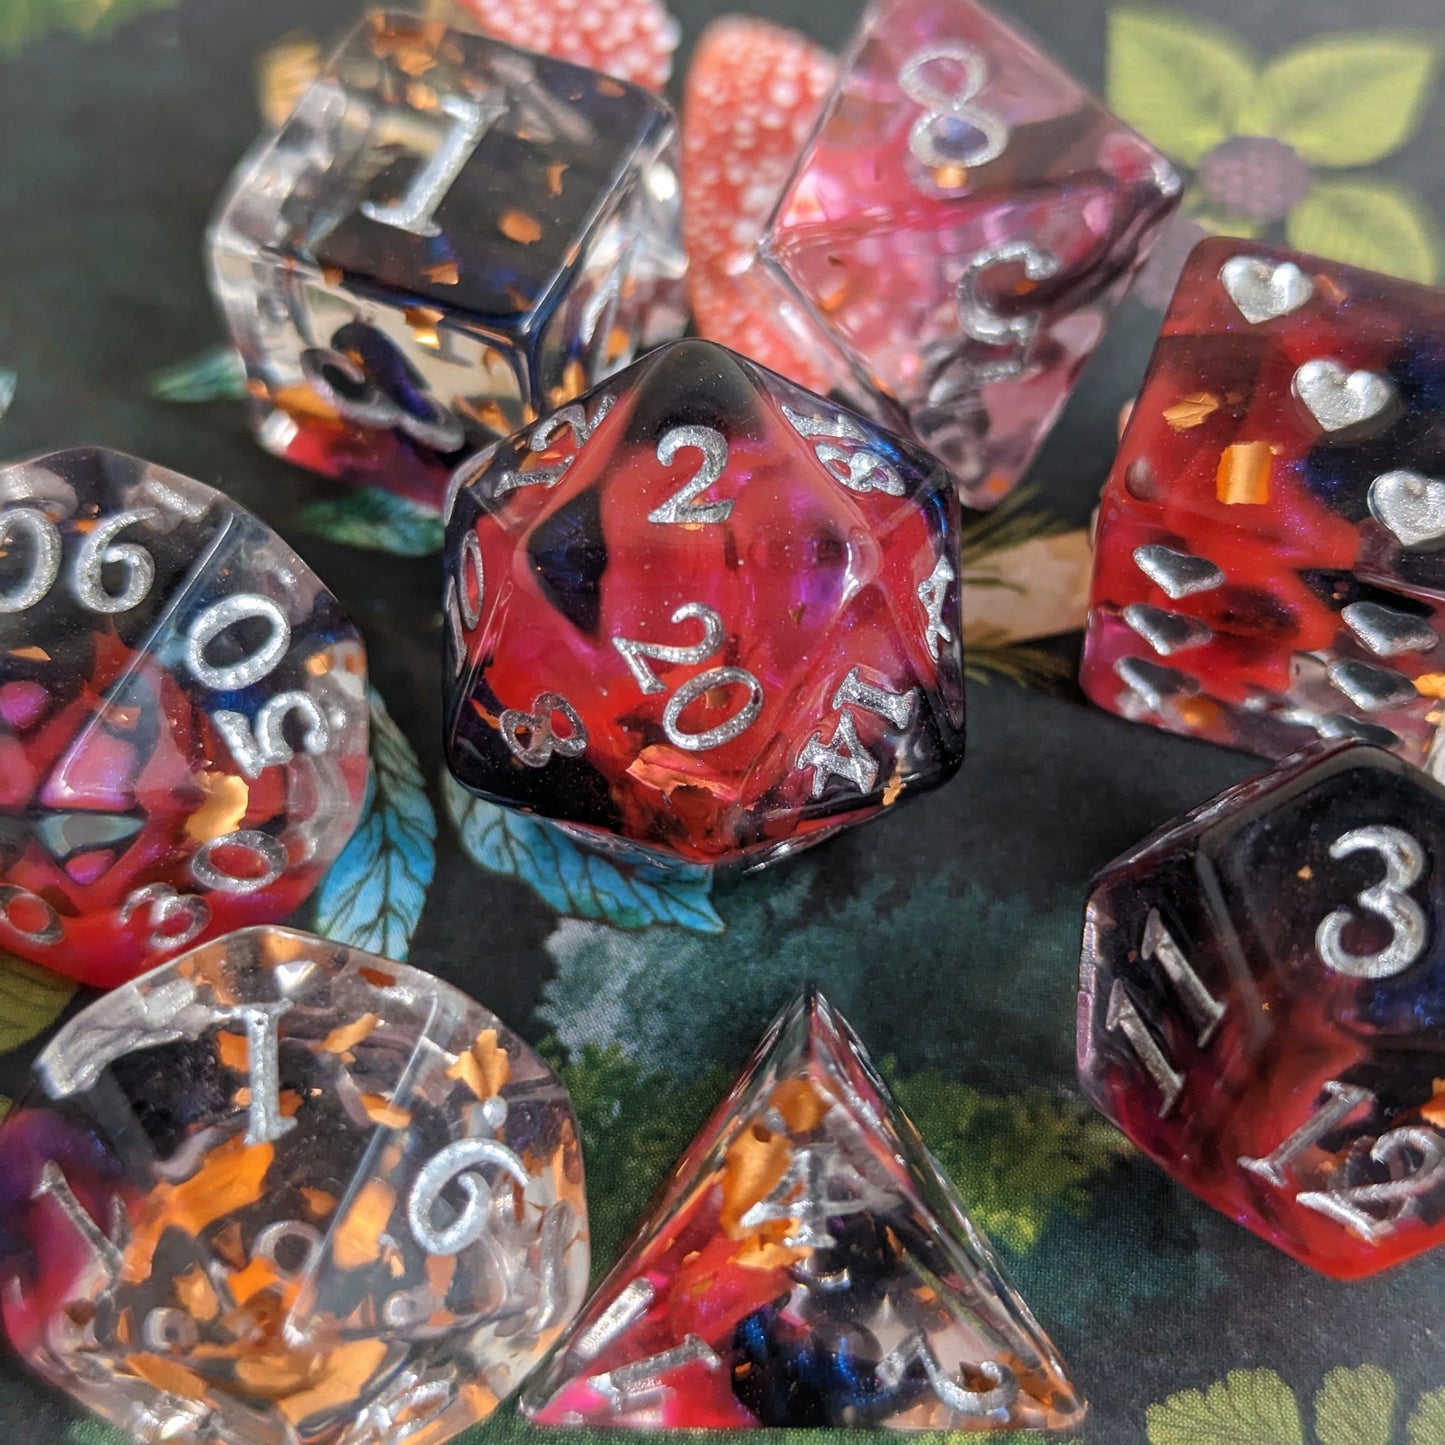 Heart Piercer 12 and 8 piece DND dice sets